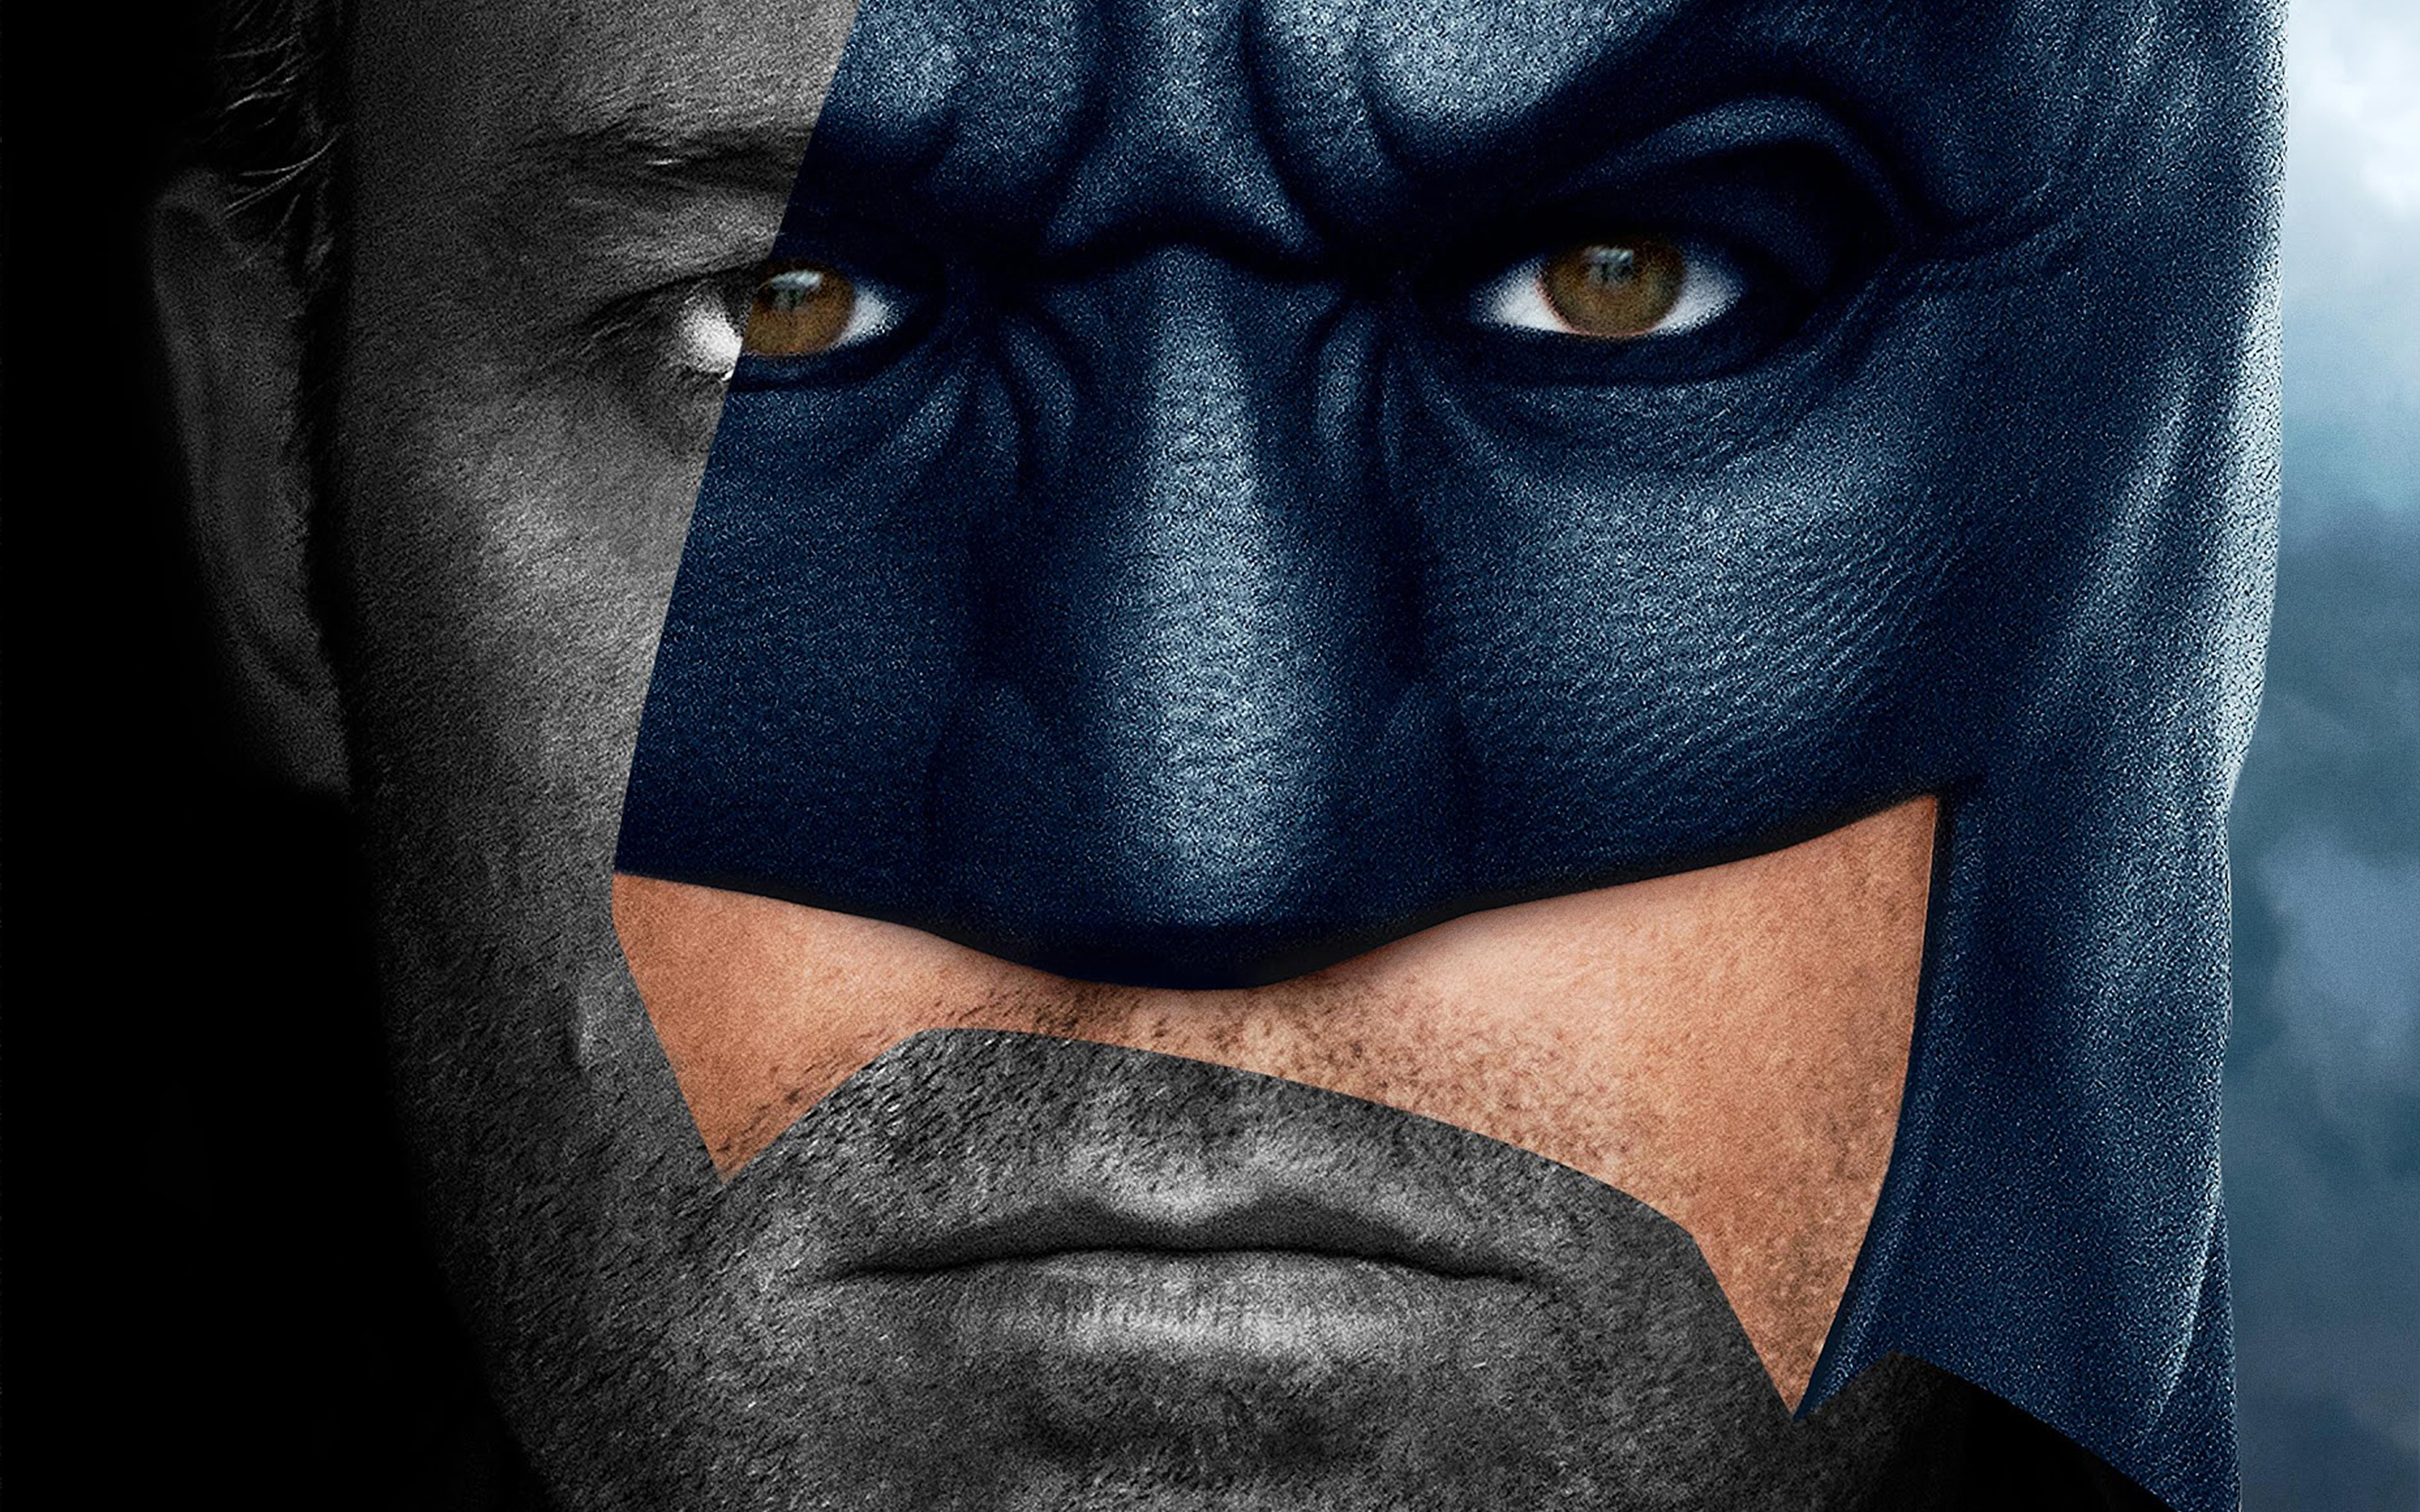 justice league wallpaper,face,head,fictional character,close up,eye